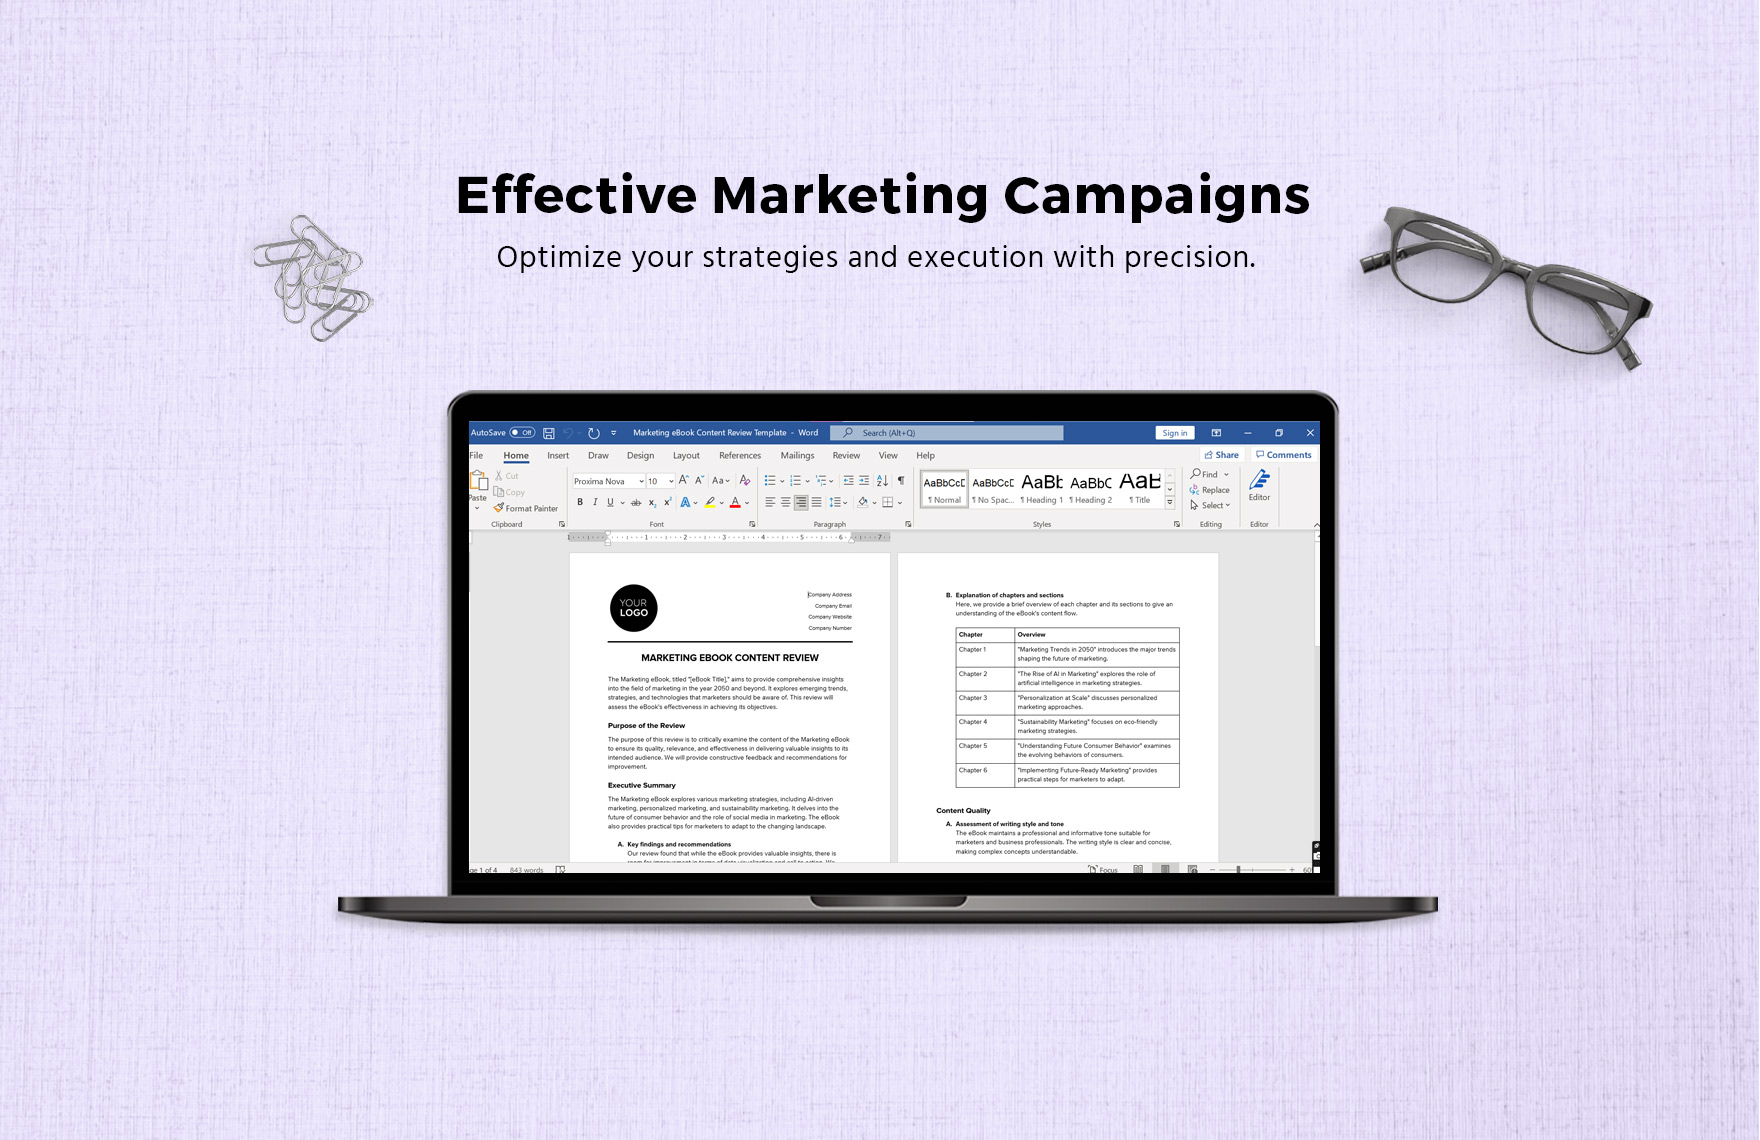 Marketing eBook Content Review Template